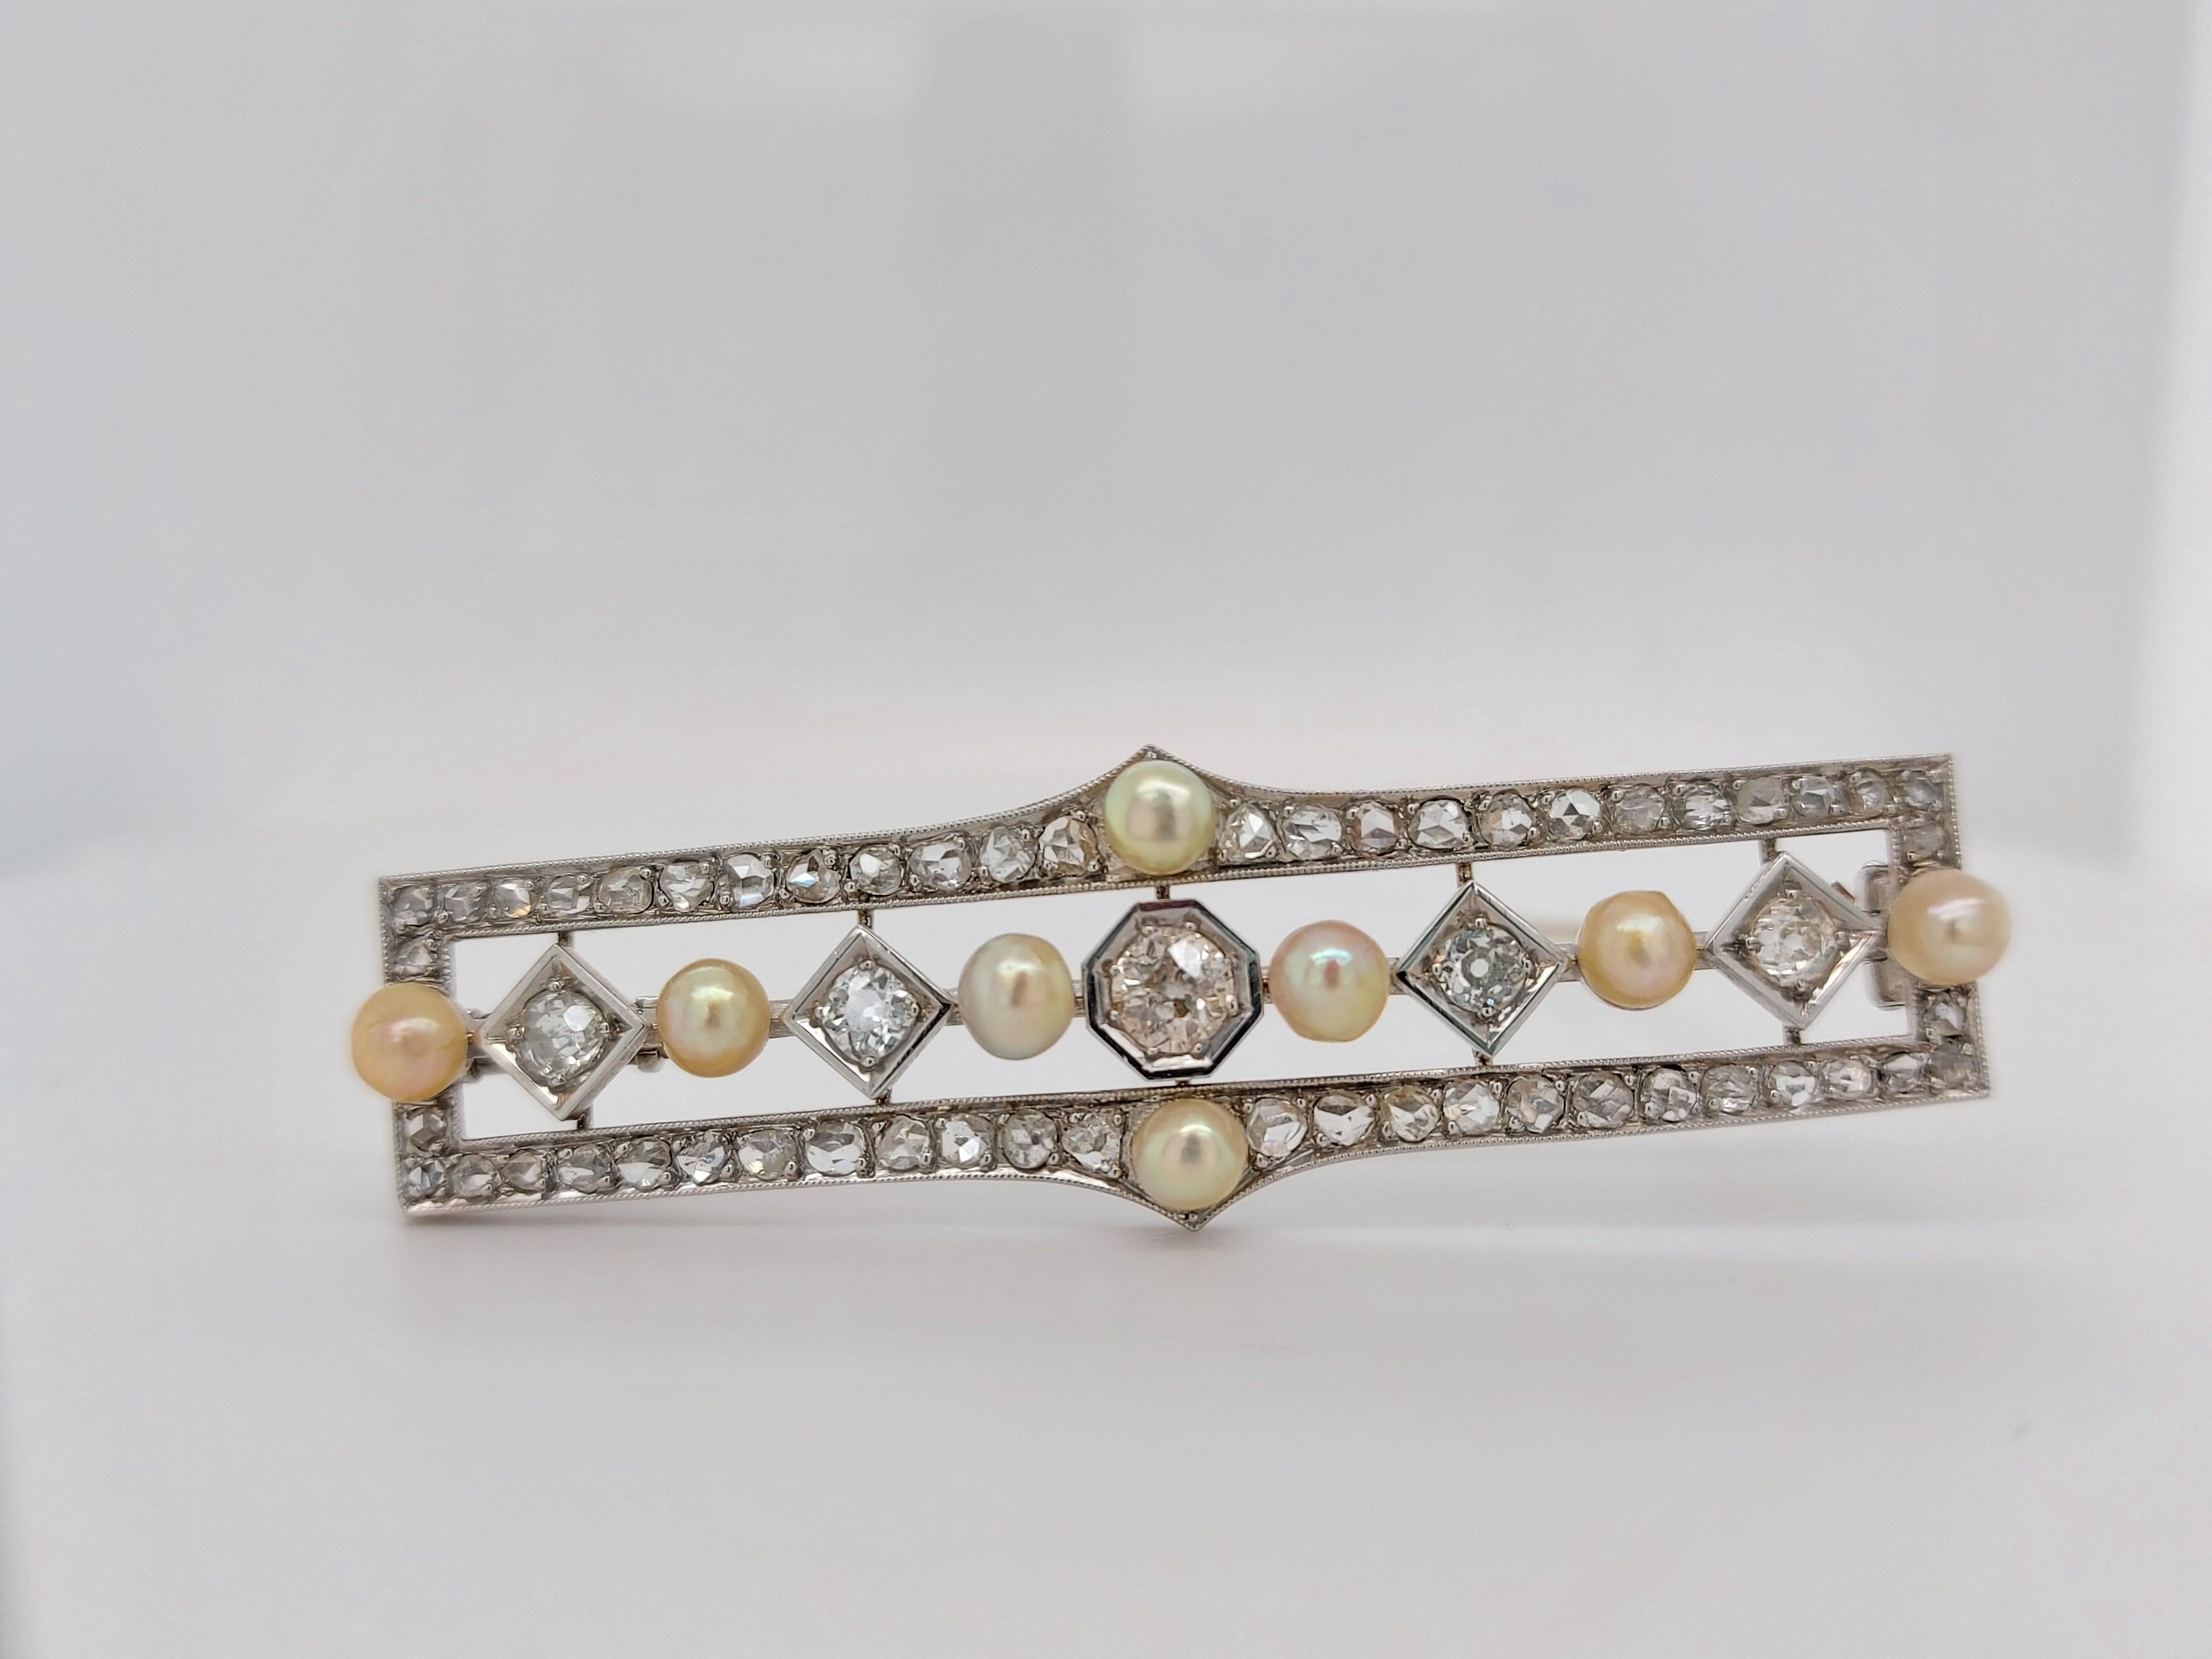 Platinum Handmade Bar Brooch with Diamond and Pearls For Sale 2